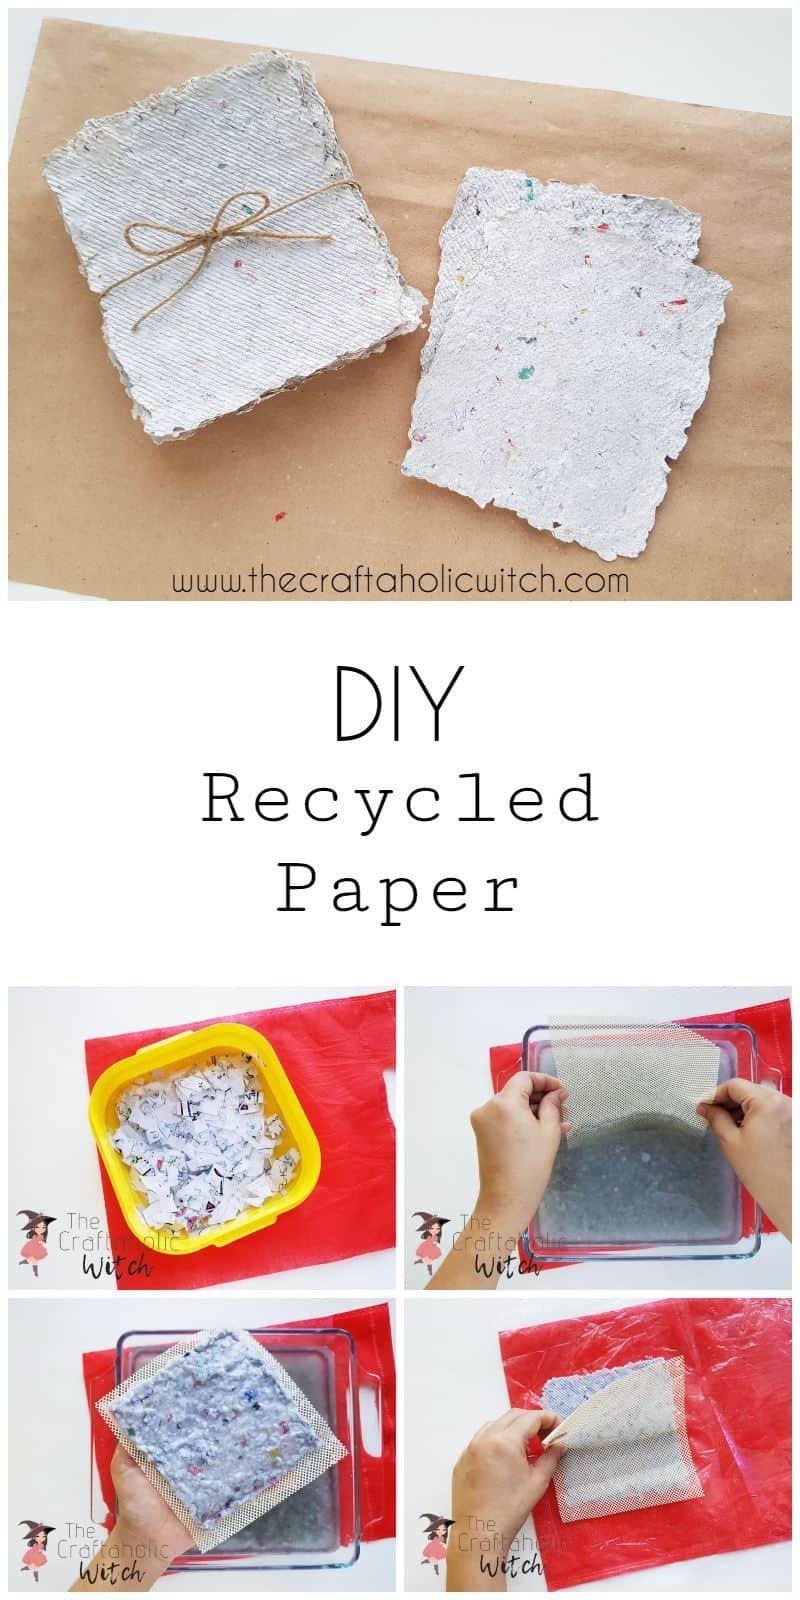 How to Make Your Own Recycled Paper at Home « The Secret Yumiverse ::  WonderHowTo